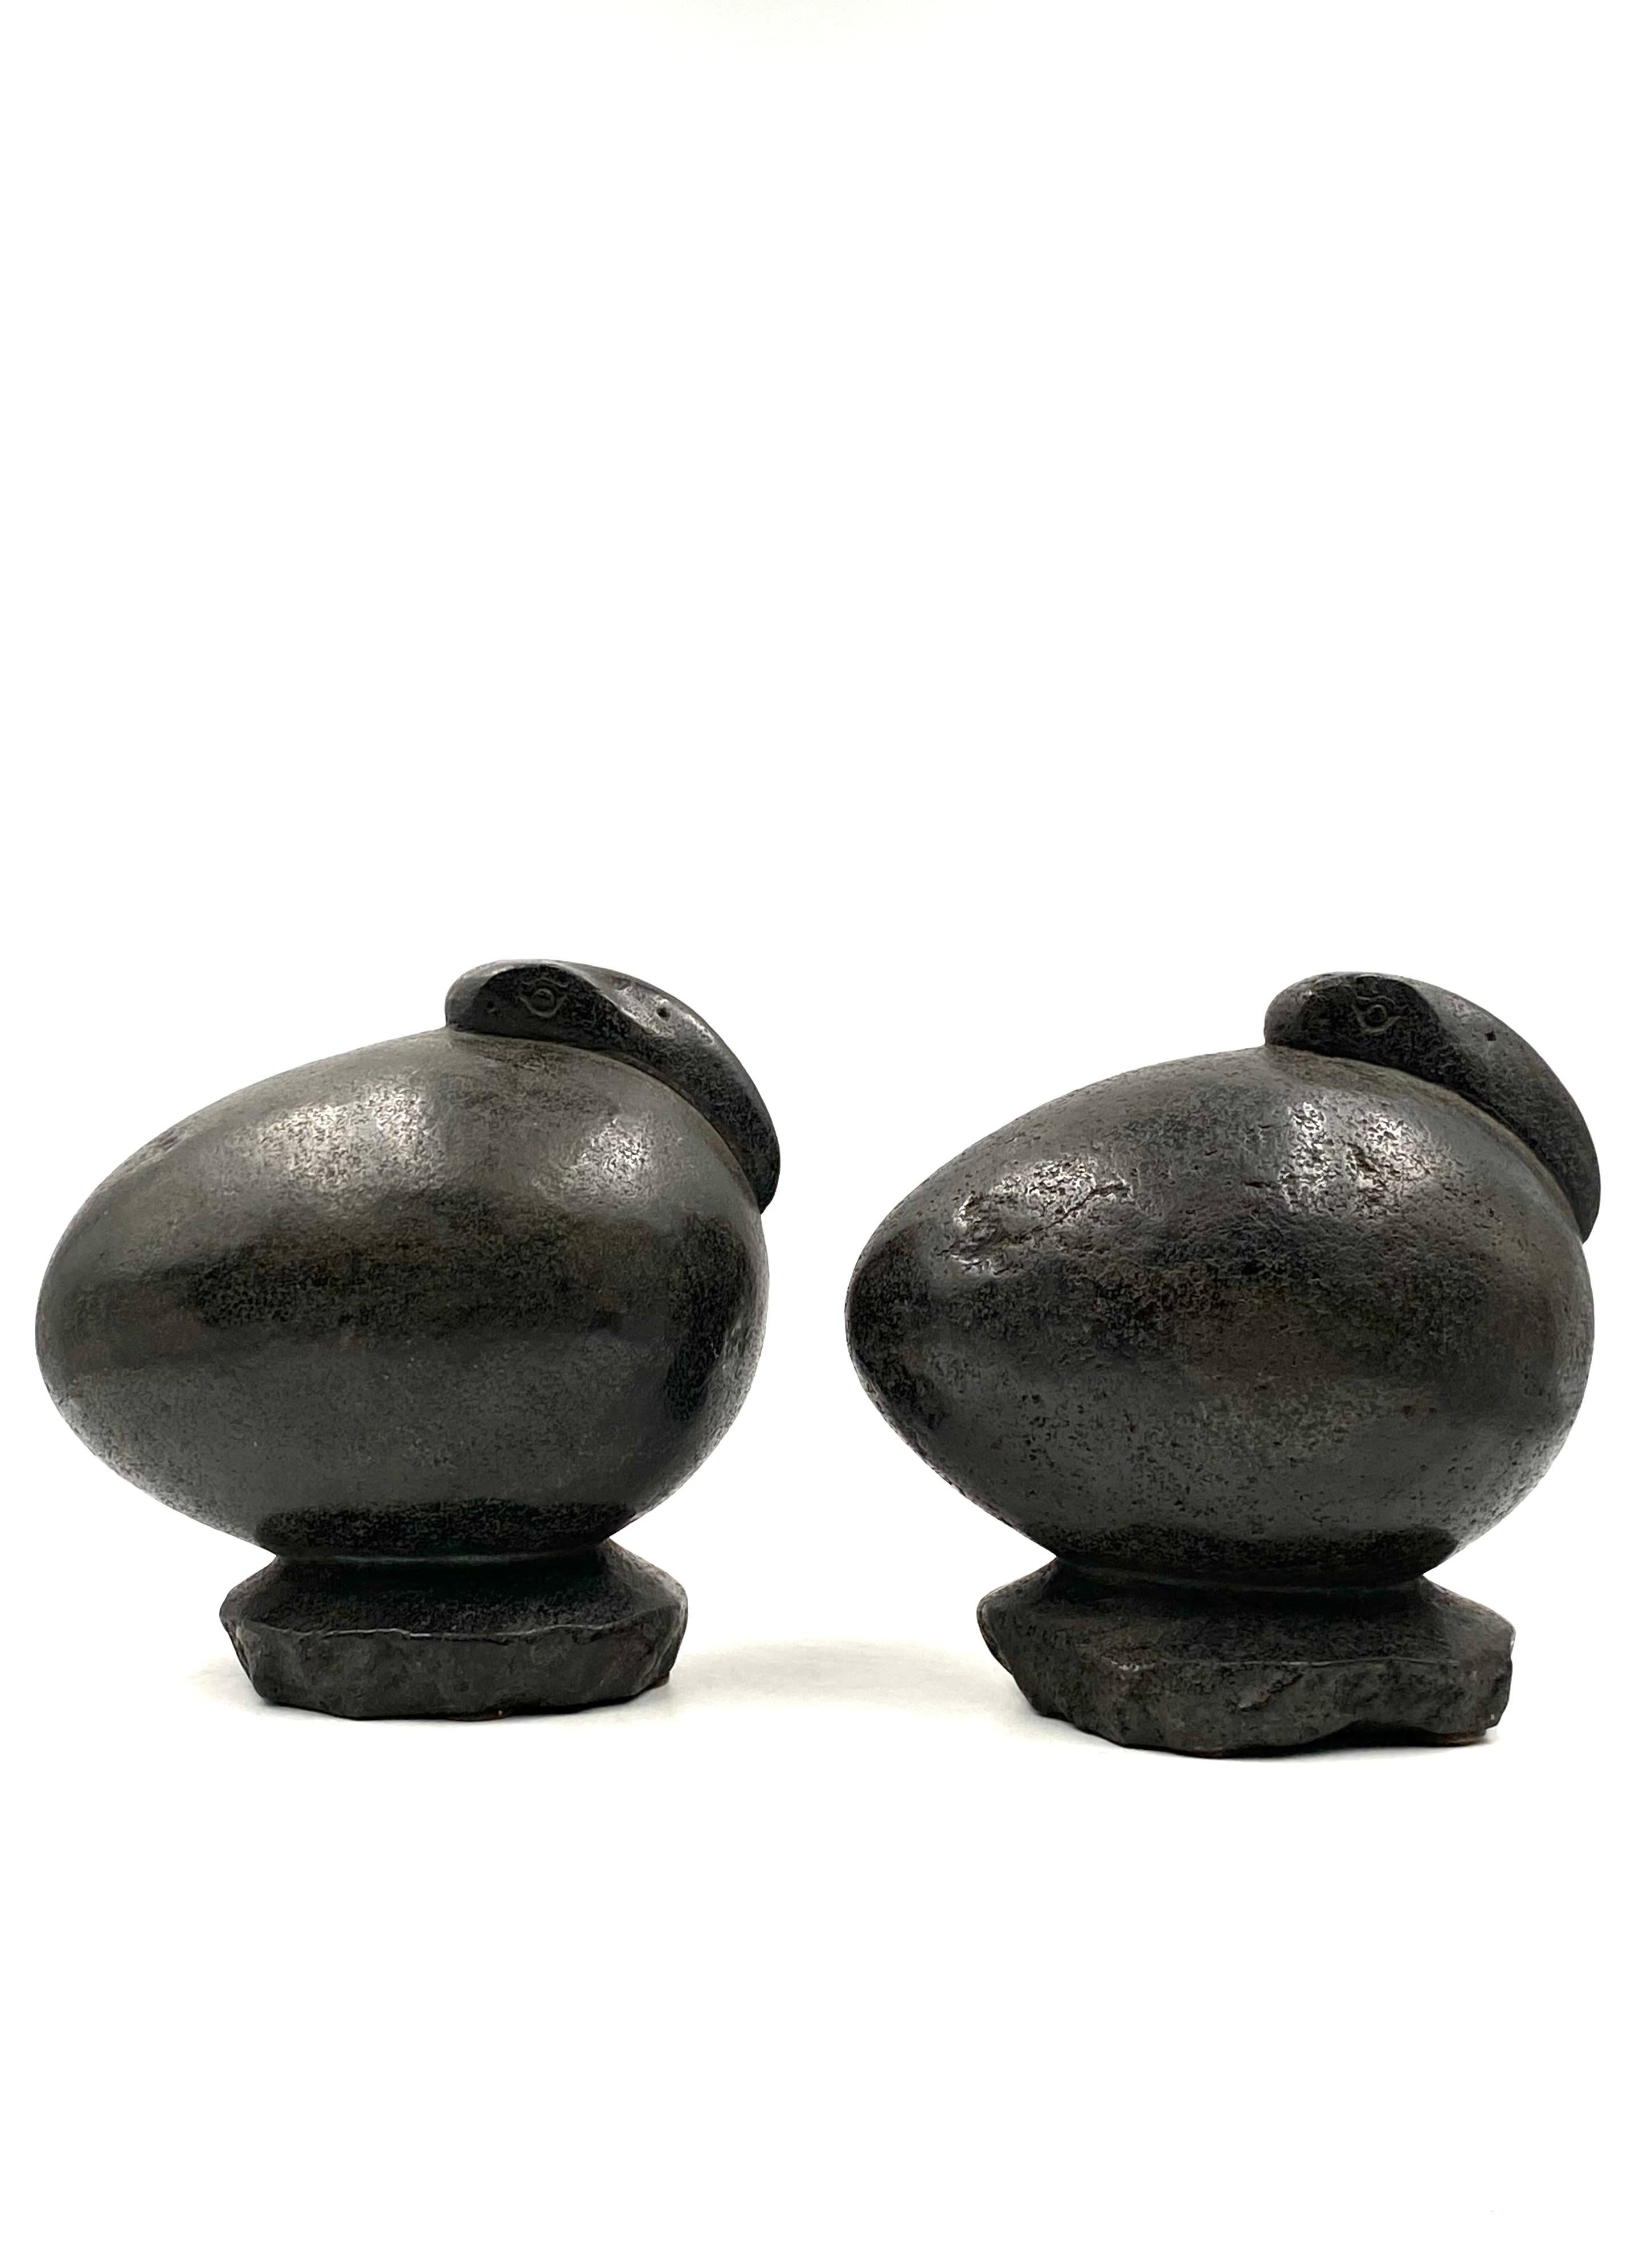 Ibis Birds, Pair of Basalt Ovoid Sculptures, France Early 20th Century 5